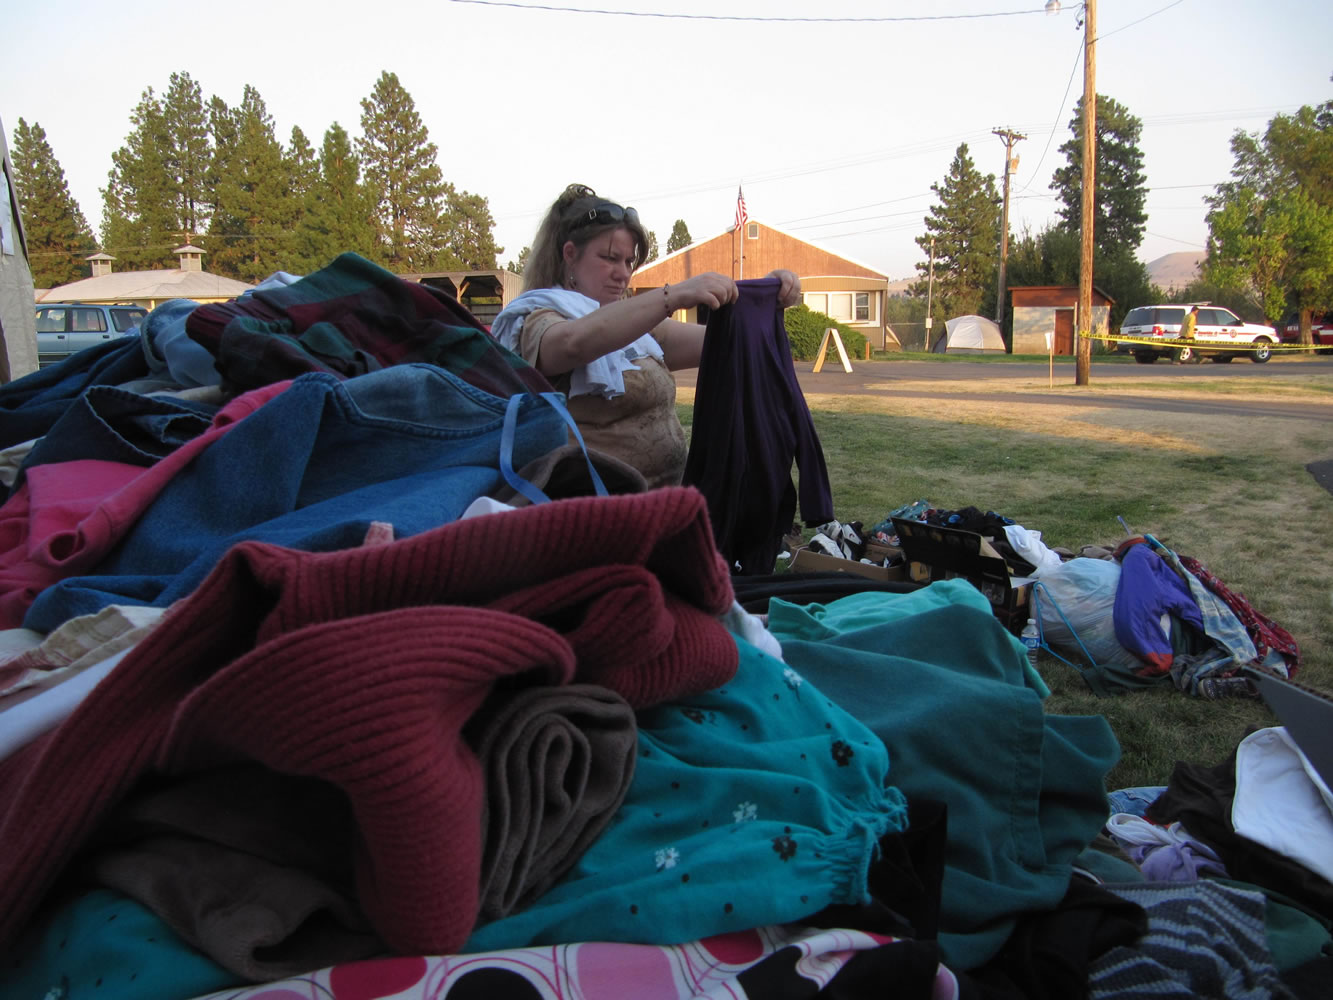 Linda Hodges, who has been evacuated from her home near Goldendale, looks through donated clothing at a Red Cross shelter on Friday. More than 200 residents of tinder-dry forests near Washington state's Satus Pass crowded a high school gymnasium to get an update on a wildfire that has burned 64 buildings on Friday. Hundreds of people in the south-central part of the state have been evacuated.